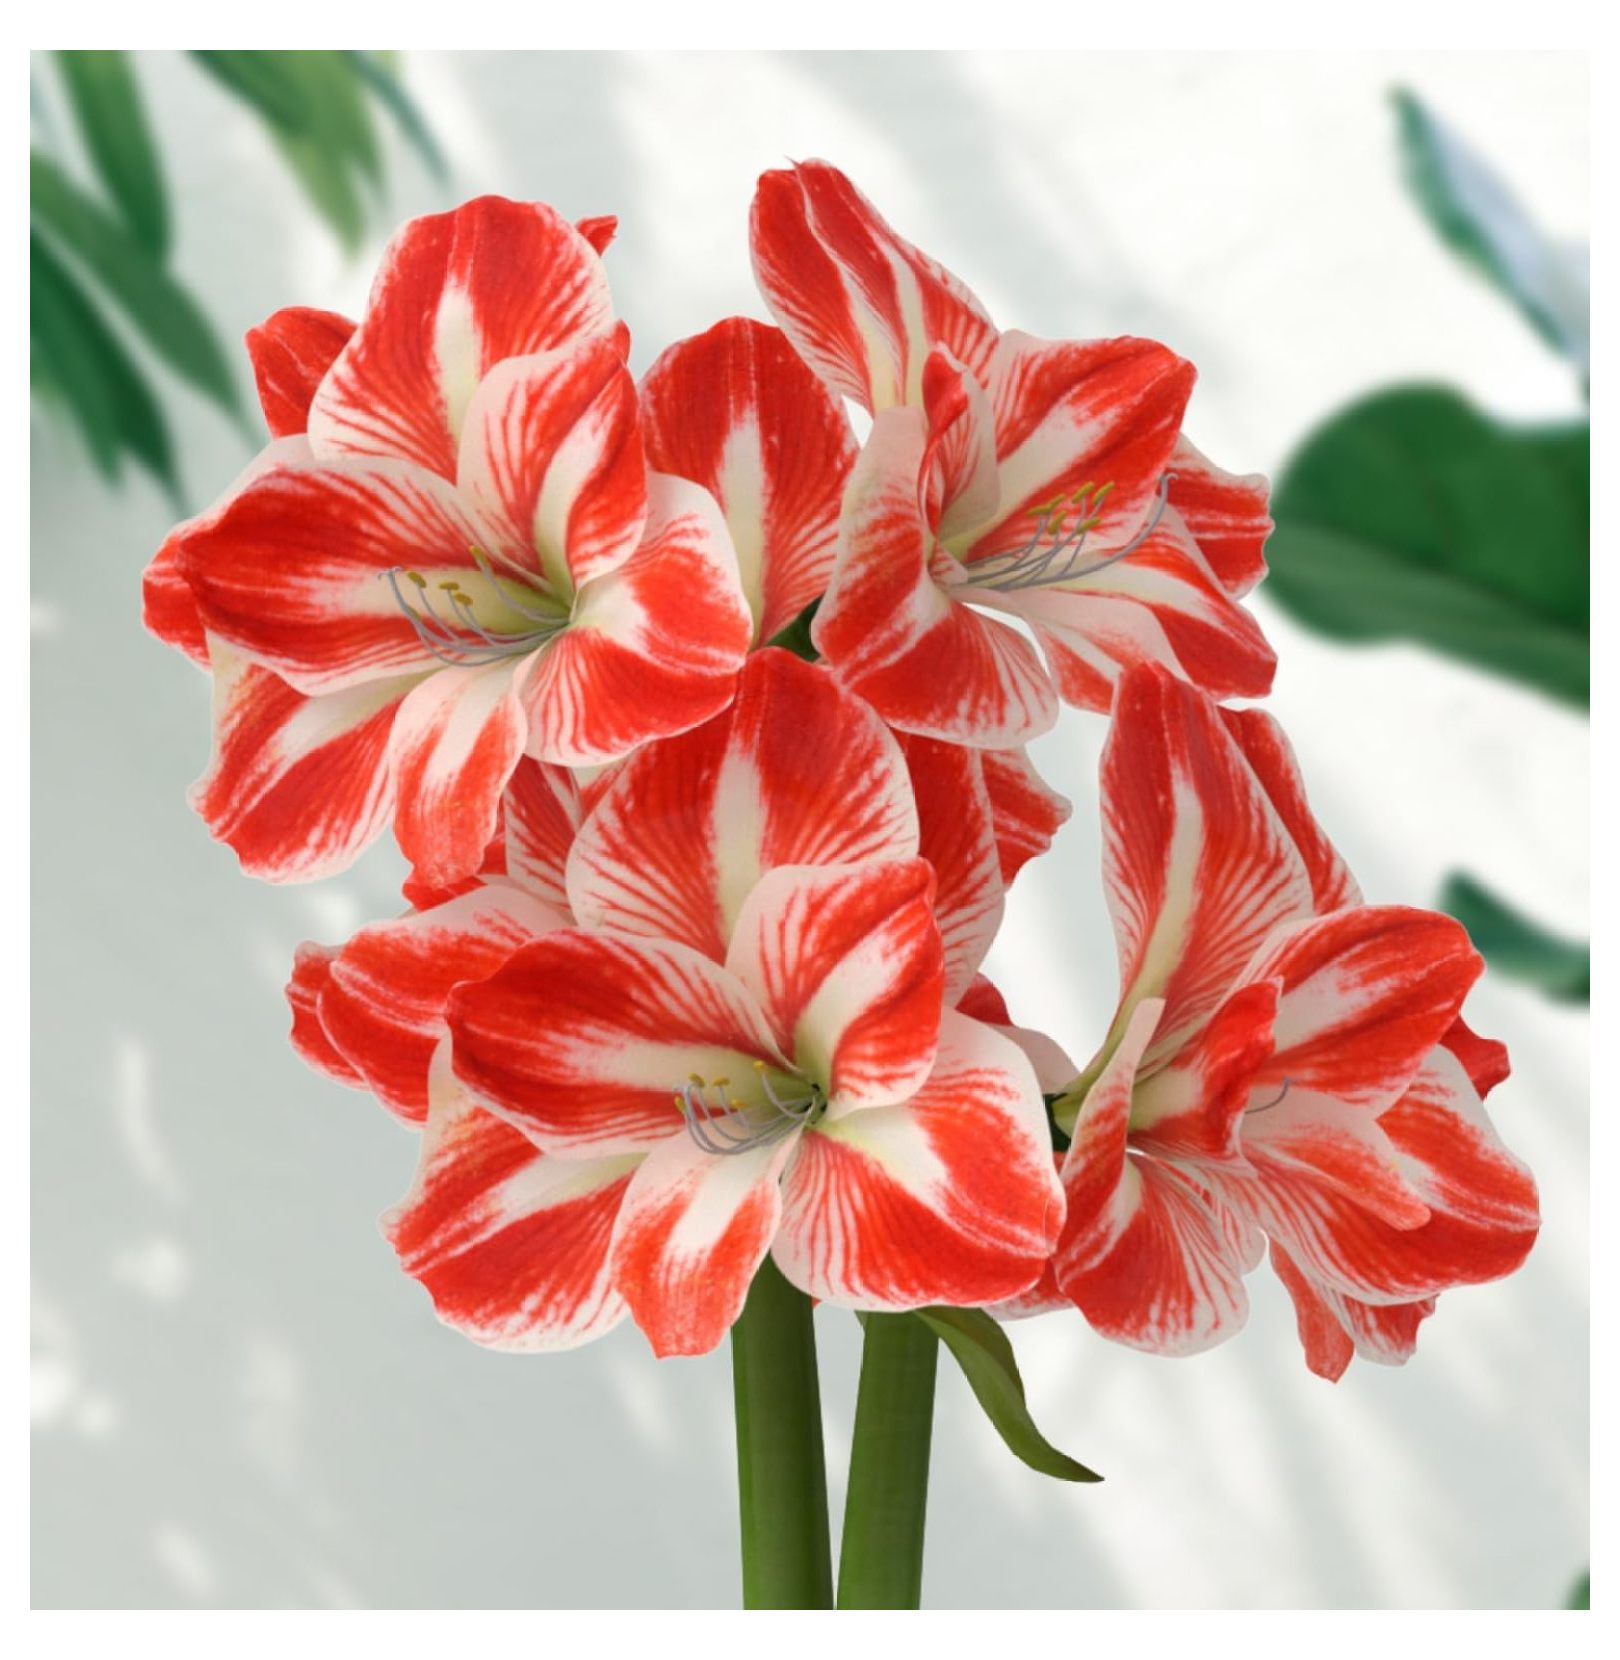 aker 5 Pack 'Minerva' Amaryllis Bulbs, Red with White s, Easy Planting ...